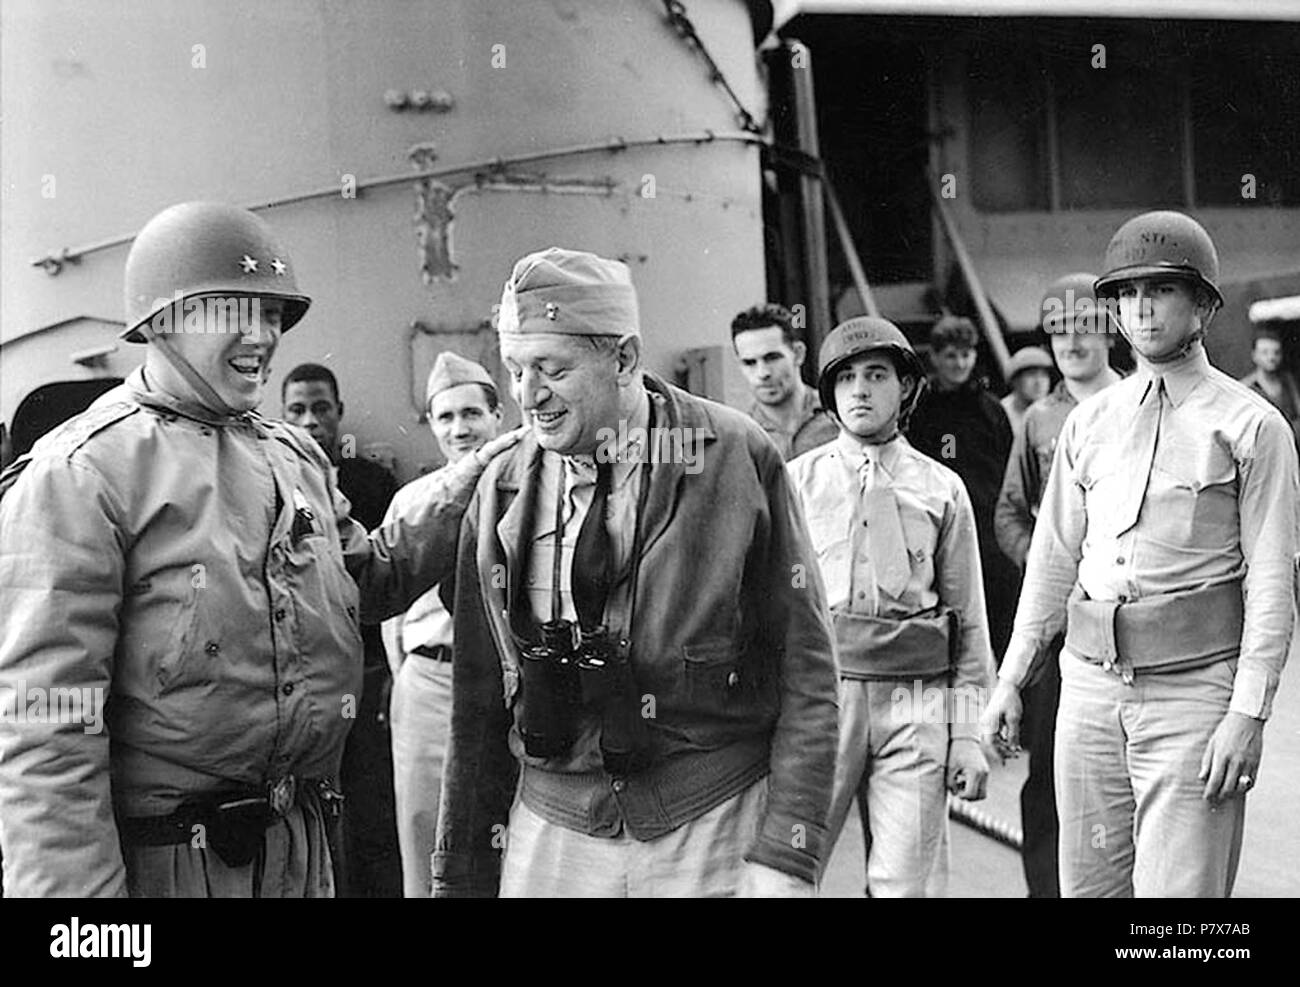 English: Major General George S. Patton, Jr., U.S. Army, Commanding General, Western Task Force, U.S. Army (left); and Rear Admiral H. Kent Hewitt, USN, Commander Western Naval Task Force, (centre) share a light moment on board USS Augusta (CA-31), off Morocco during the Operation 'Torch' landings. Though the original photo is dated 4 December 1942, it was probably taken shortly before MGen. Patton went ashore on 8 or 9 November 1942 . 1942 171 George S. Patton and Rear Admiral H. Kent Hewitt Stock Photo